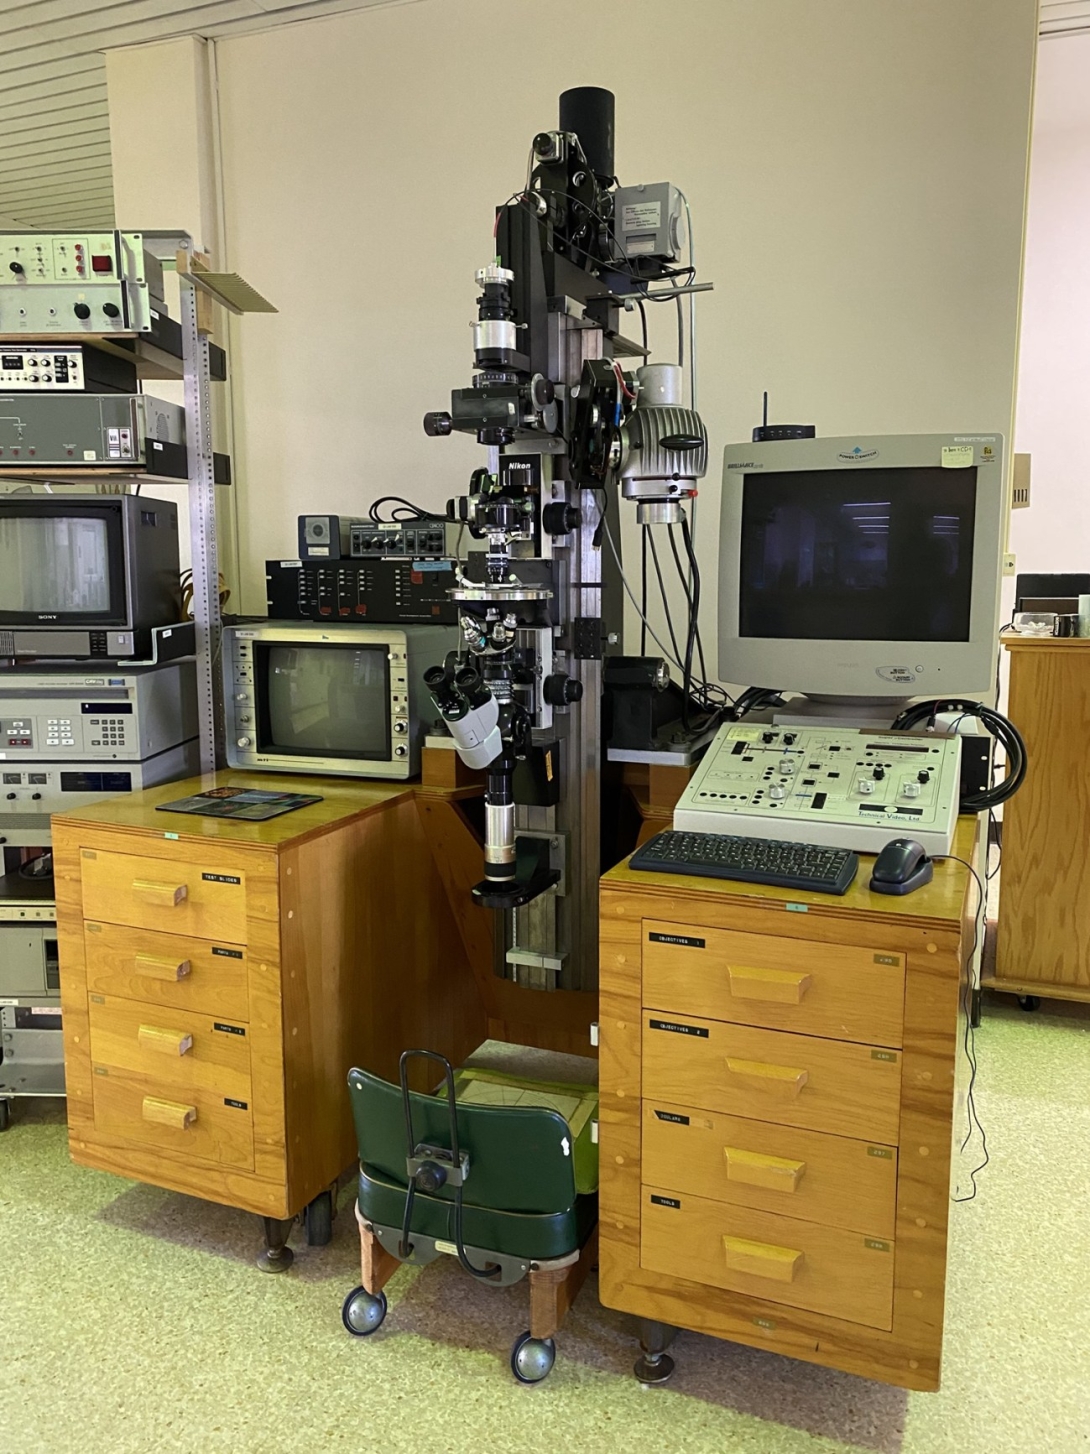 Shinya Inouye's famous pol-scope has been cleaned up and placed in the MBL-WHOI Library as an exhibit. Credit: Dyche Mullins